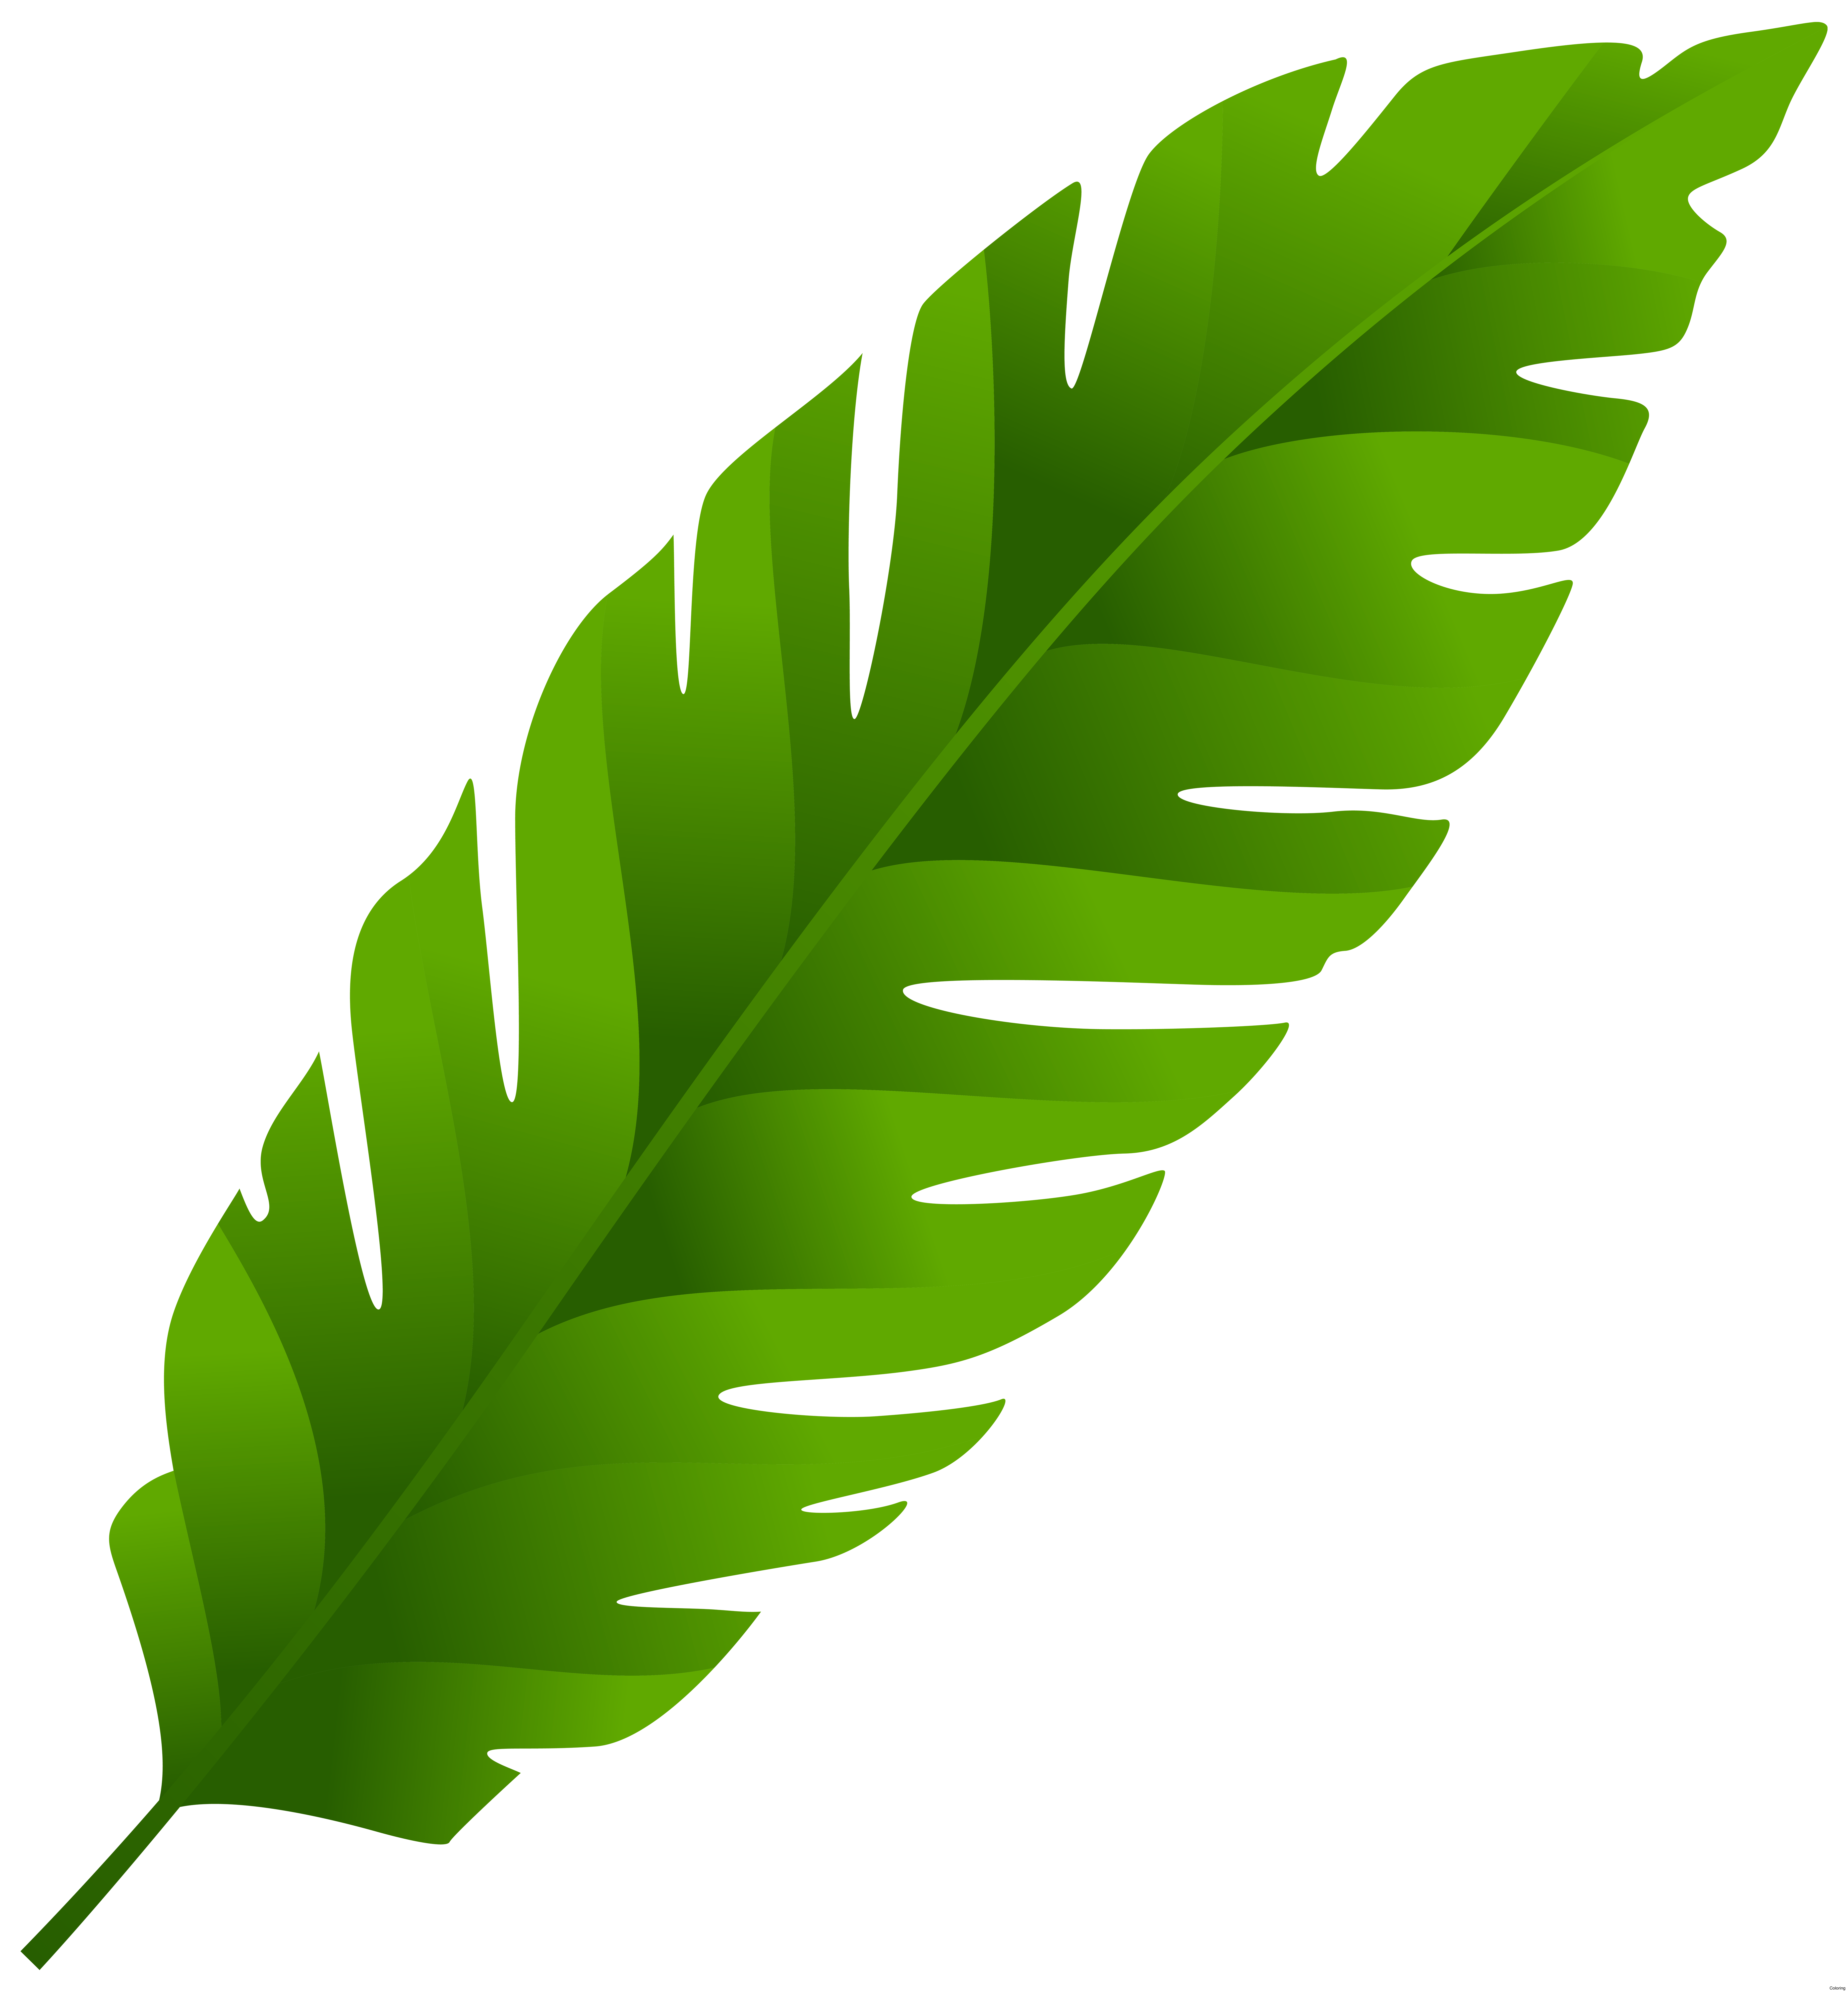 printable-palm-leaf-paper-palm-leaf-template-matah-cut-out-the-shape-and-use-it-for